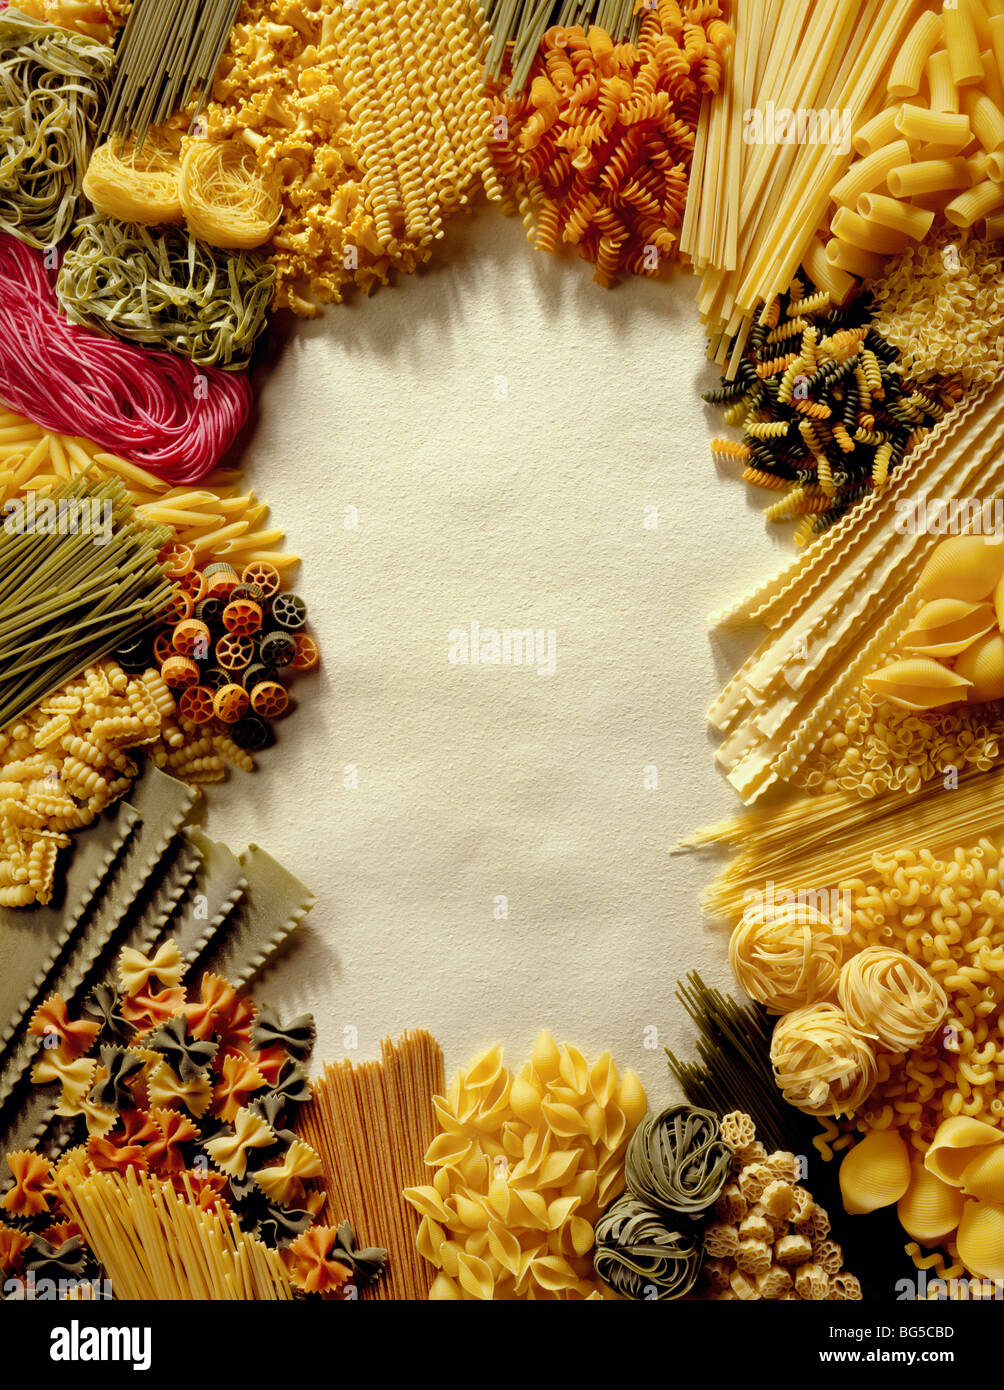 Assorted dried and fresh pastas in a border Stock Photo